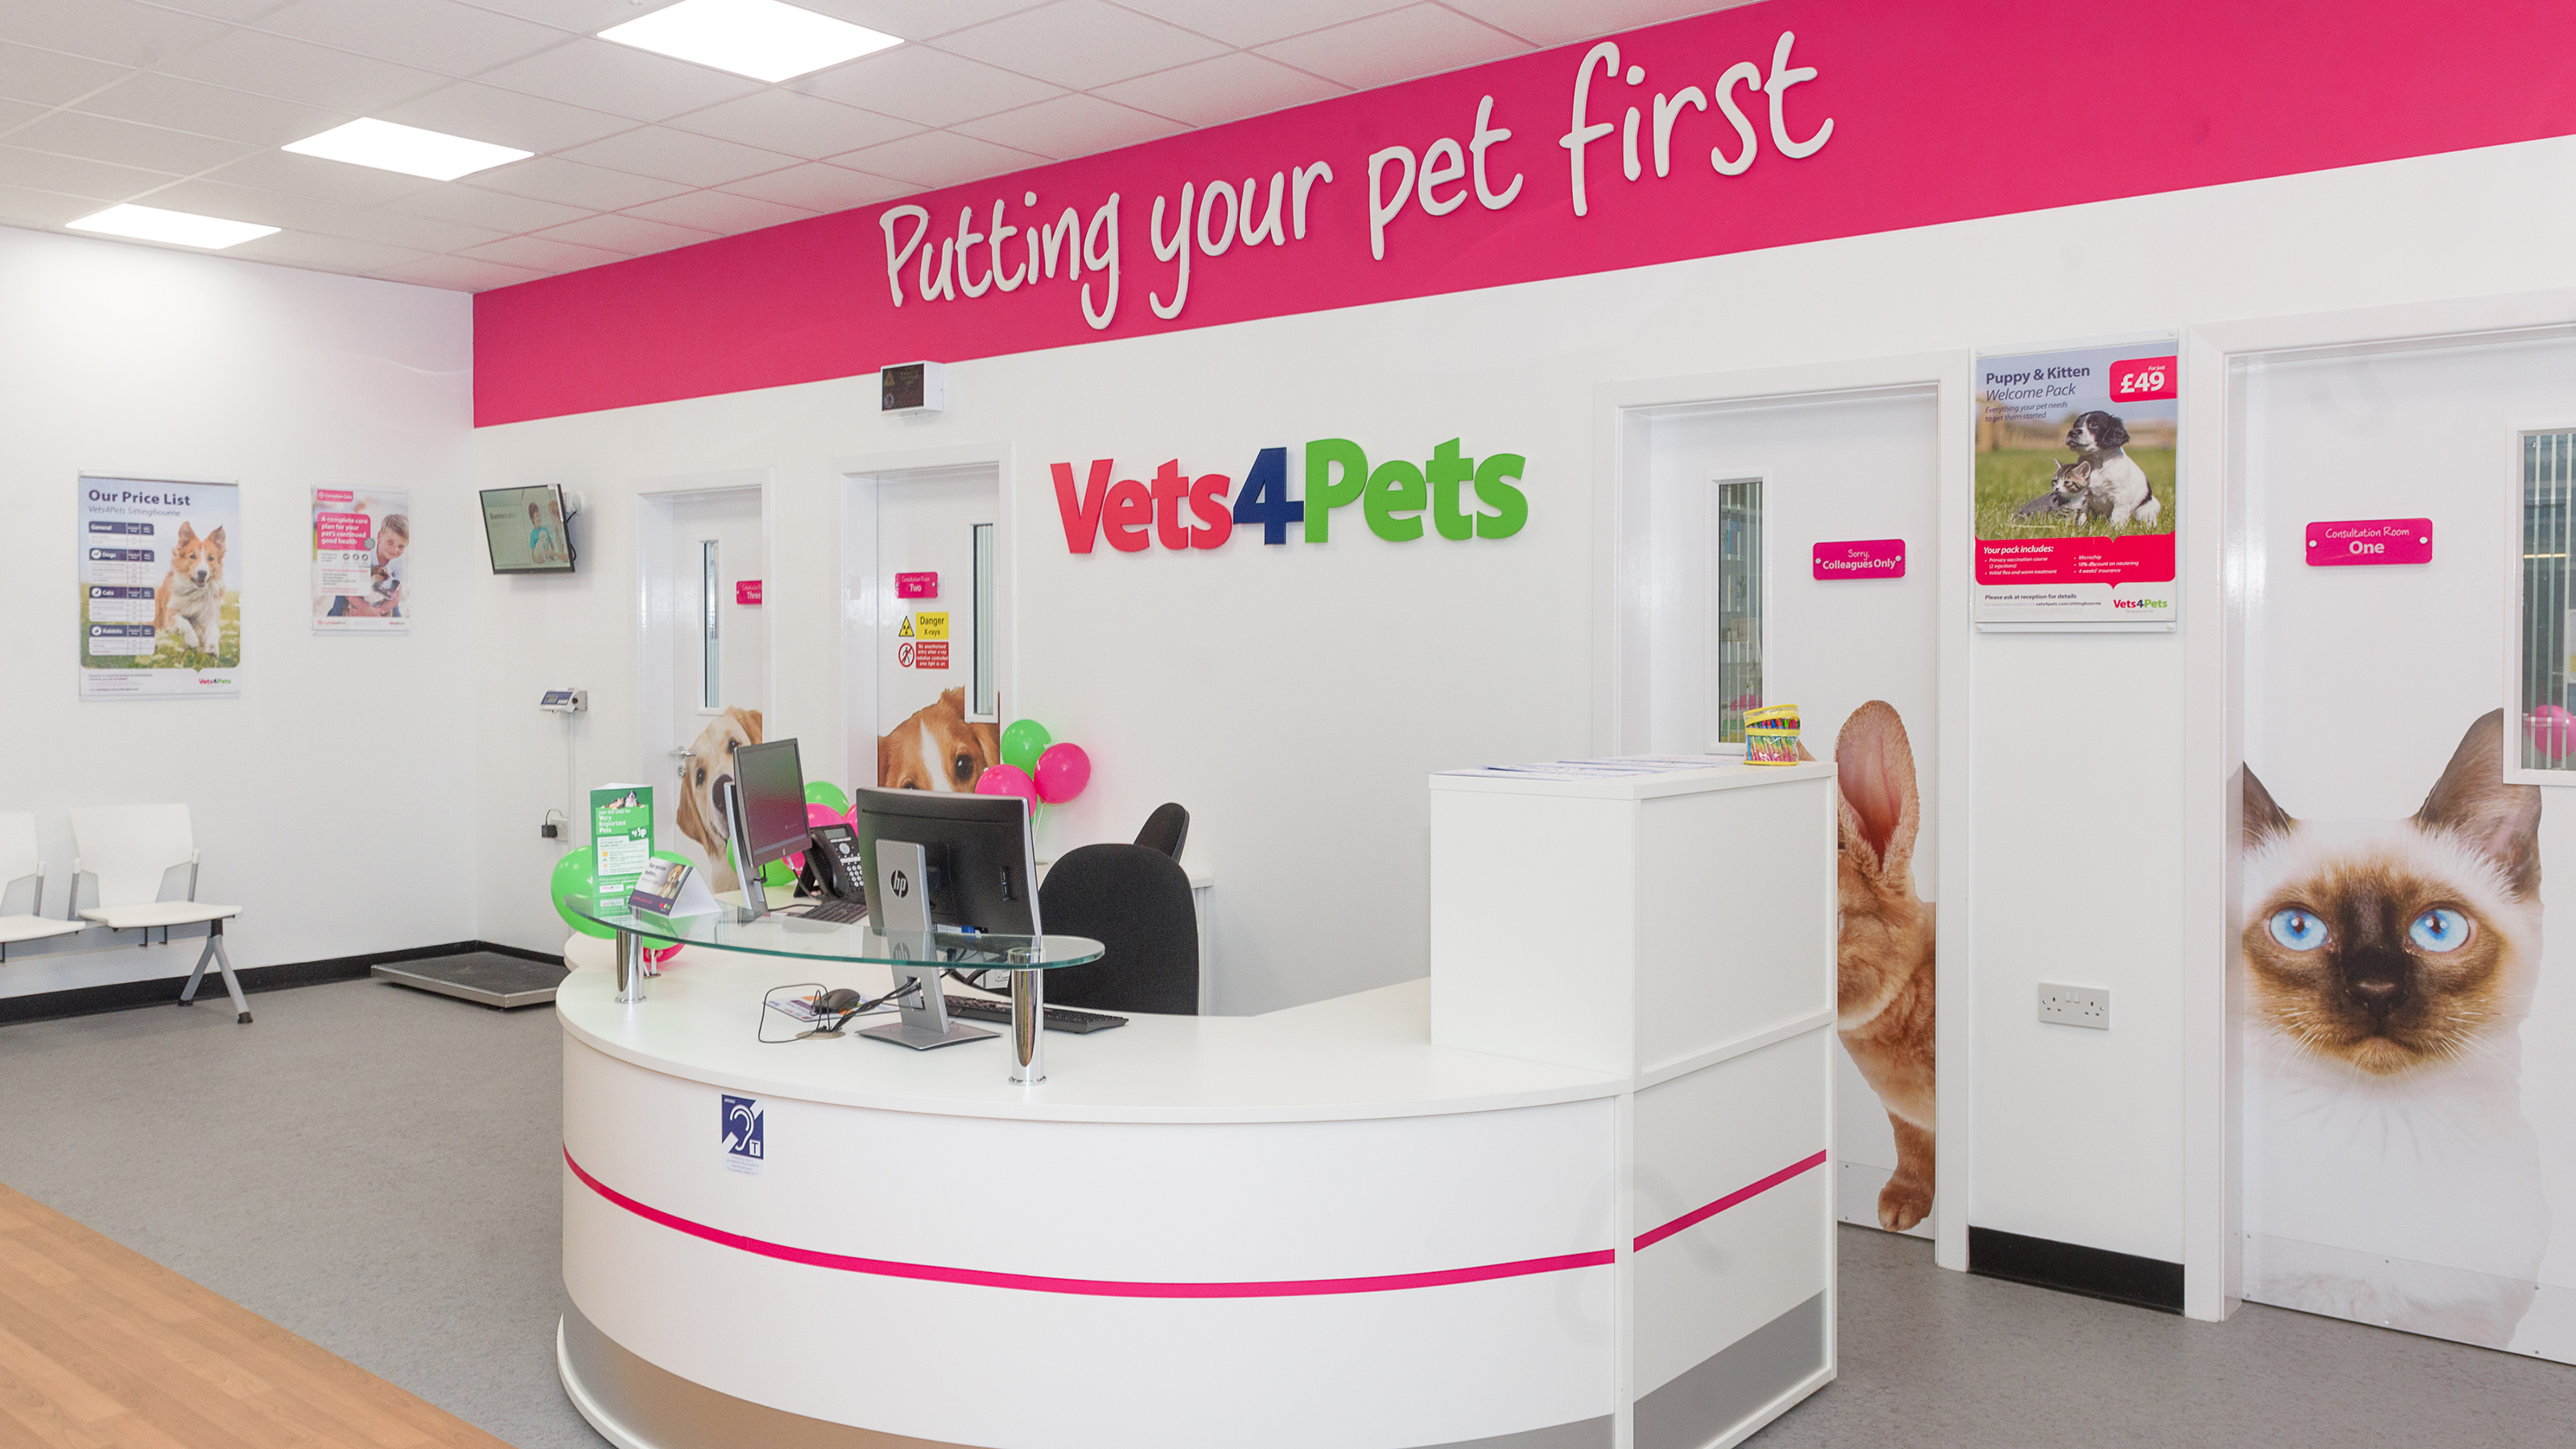 pets at home vets